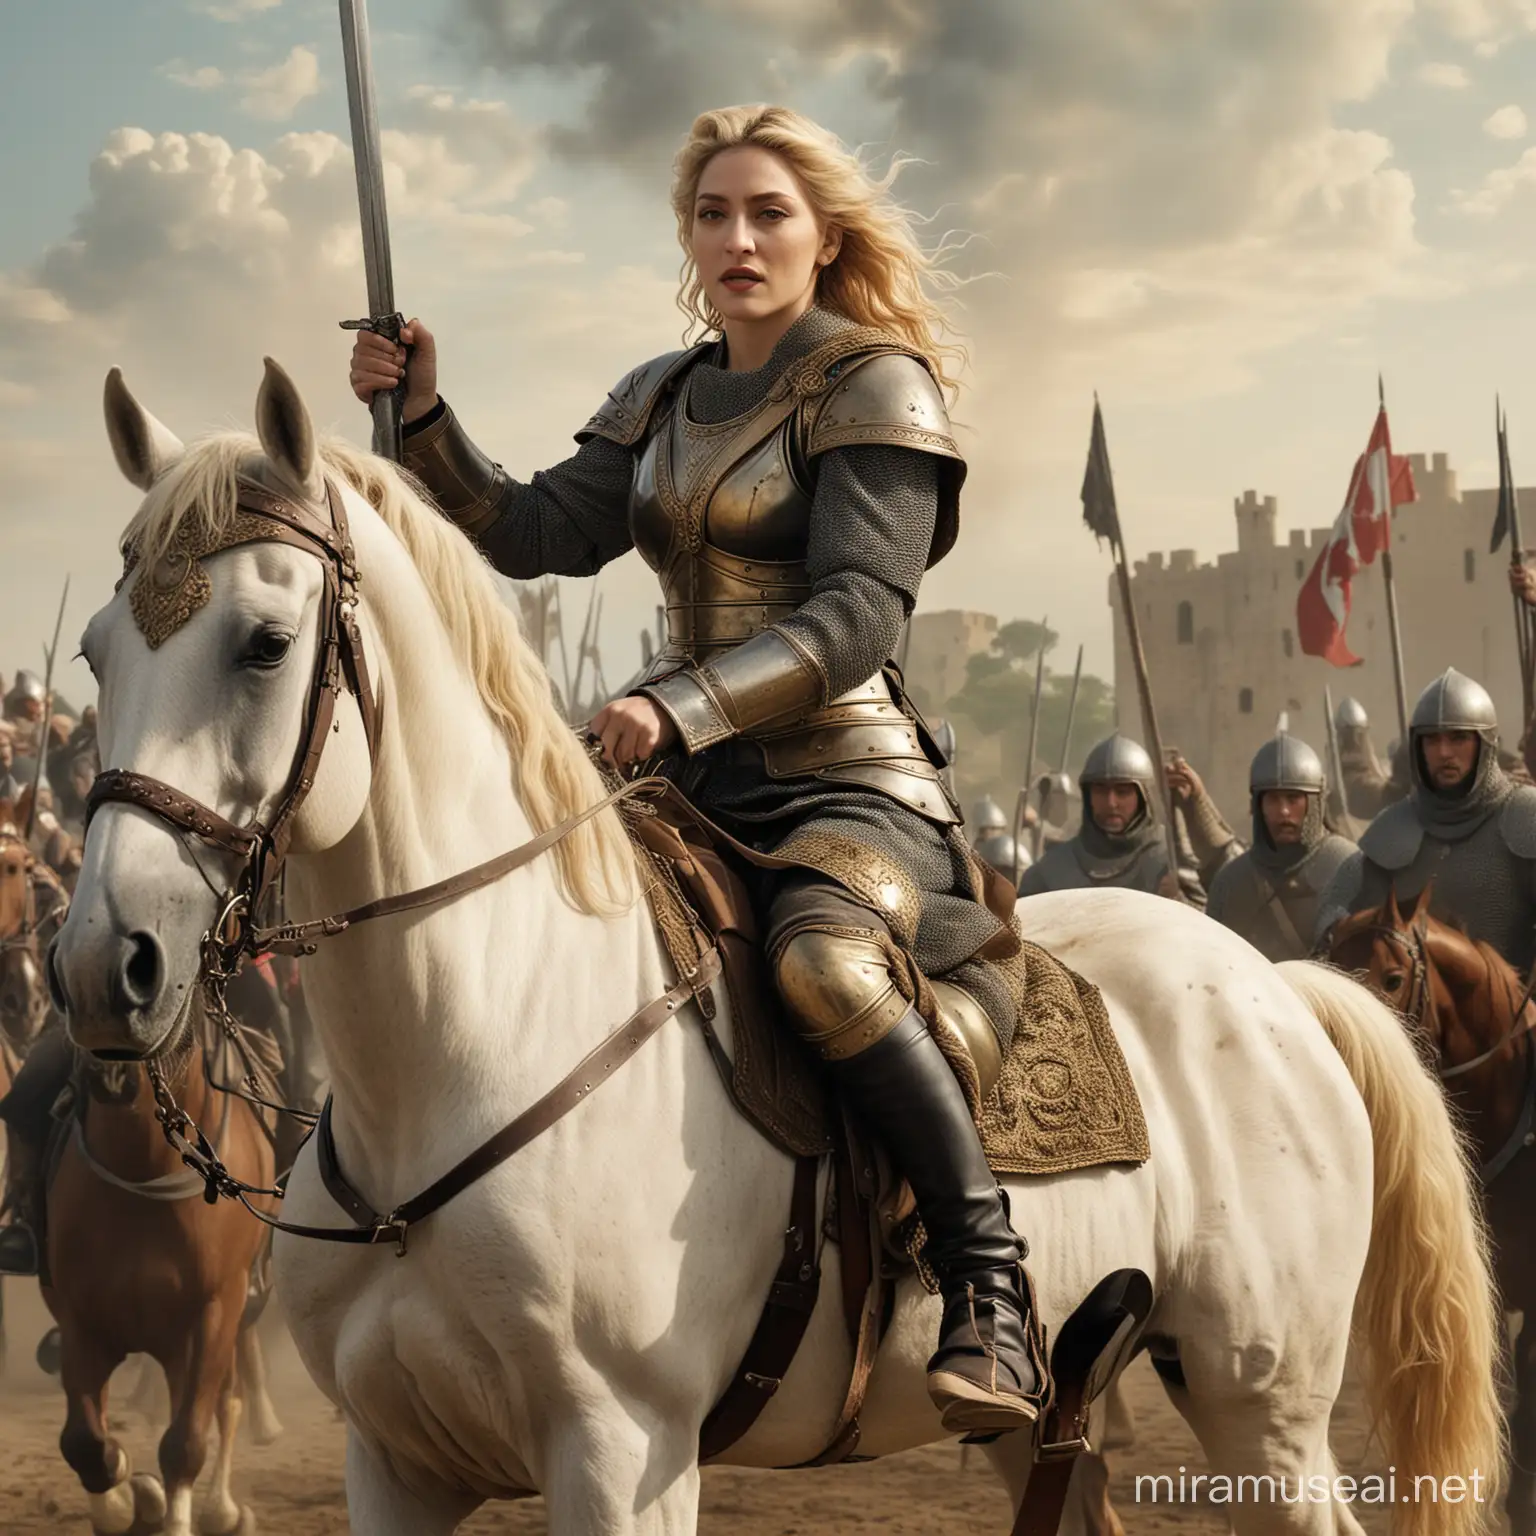 Madonna Riding Horse into Medieval Battle